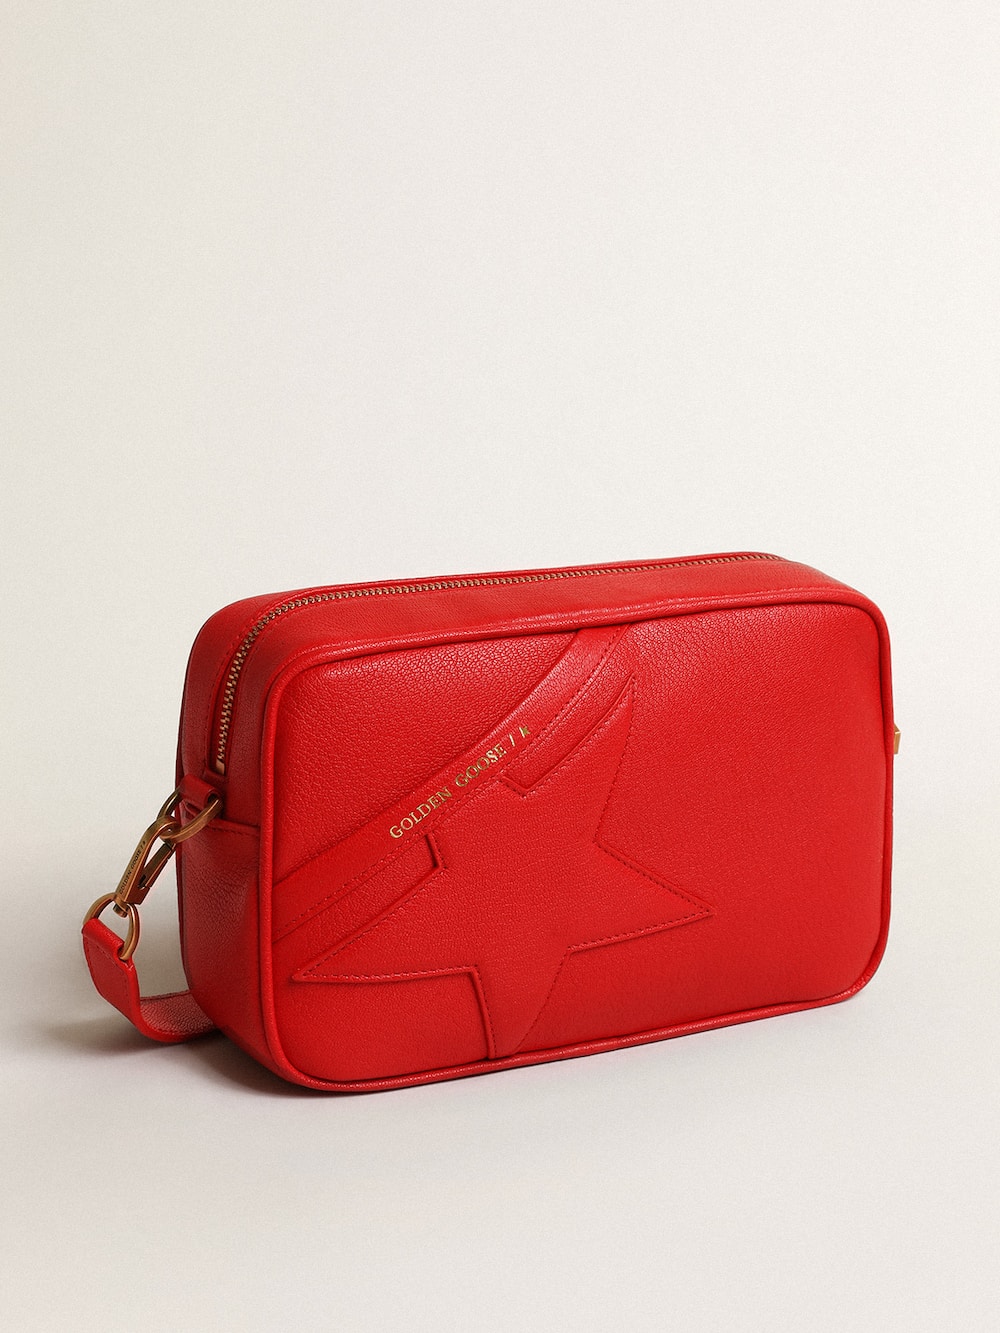 Golden Goose - Women’s Star Bag in bright red leather in 